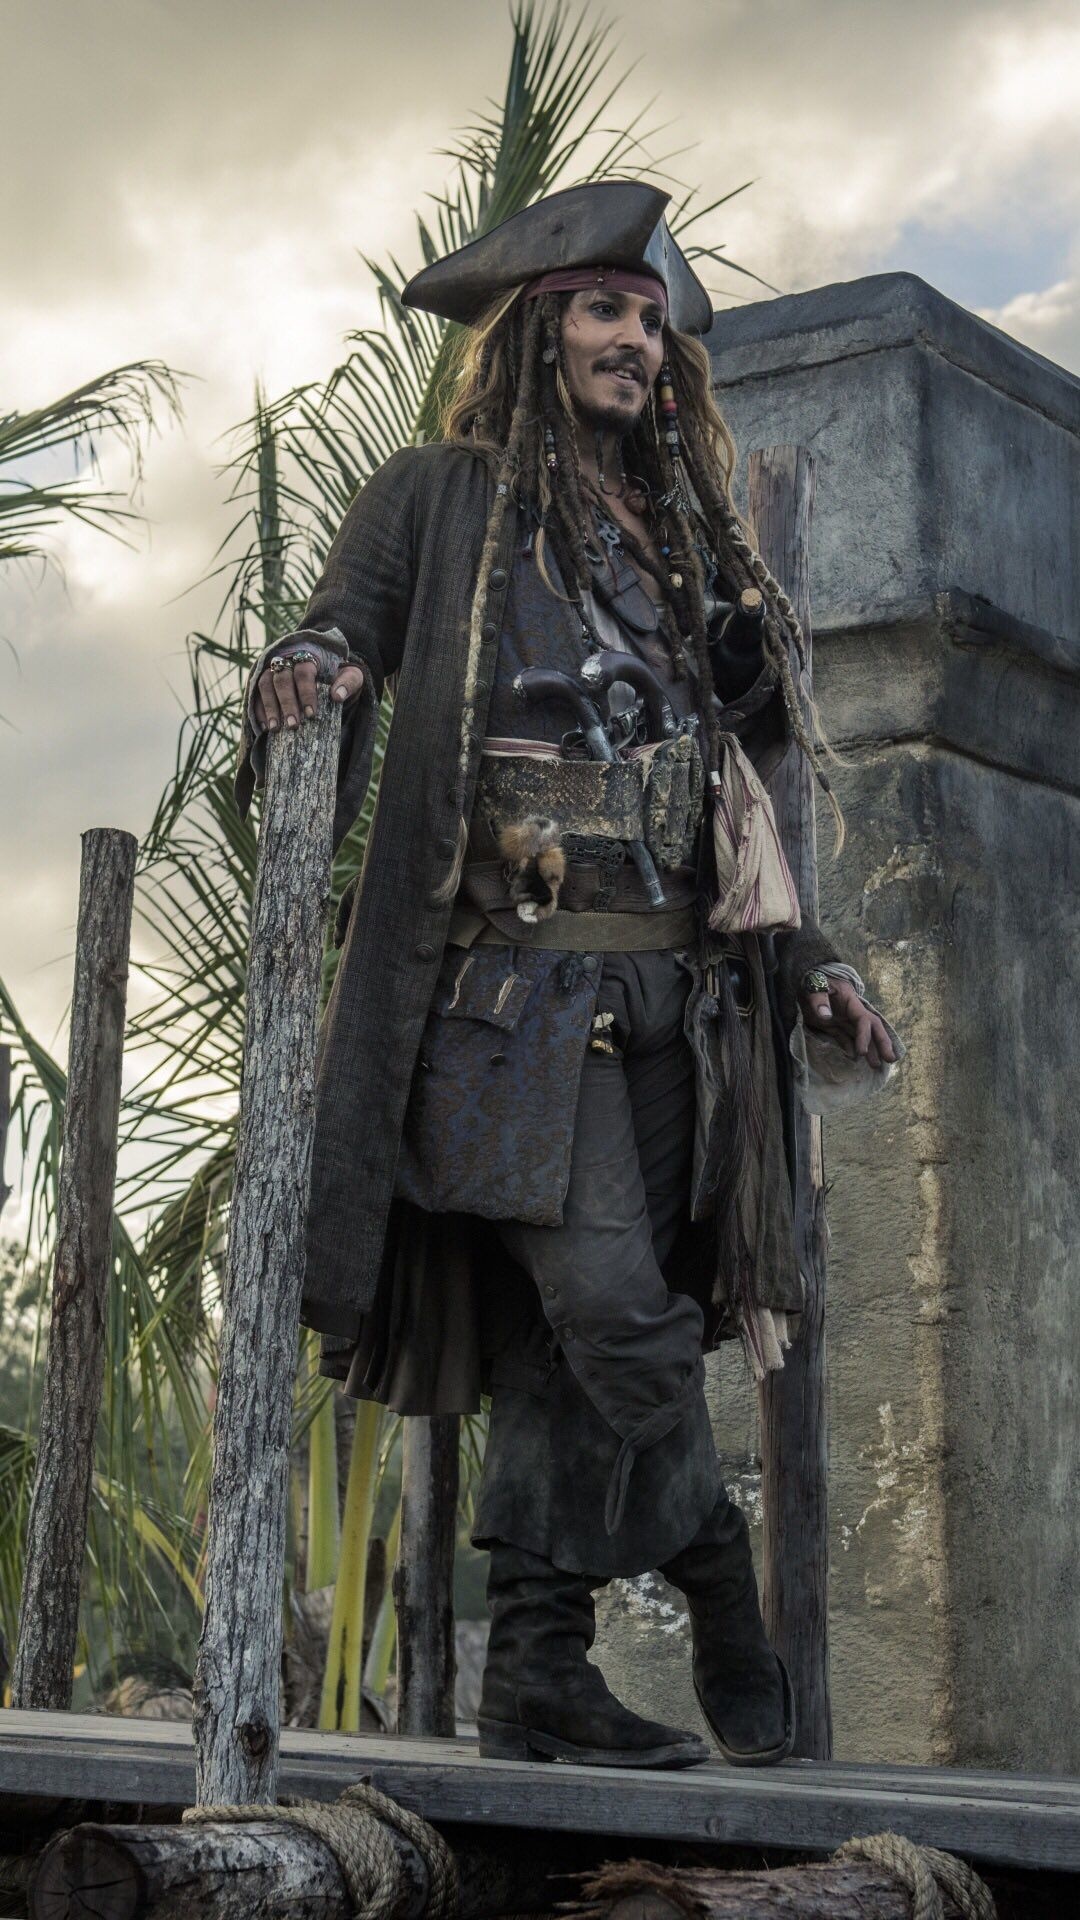 Johnny Depp: Pirates of the Caribbean, The story follows pirate Jack Sparrow, Iconic performance. 1080x1920 Full HD Background.